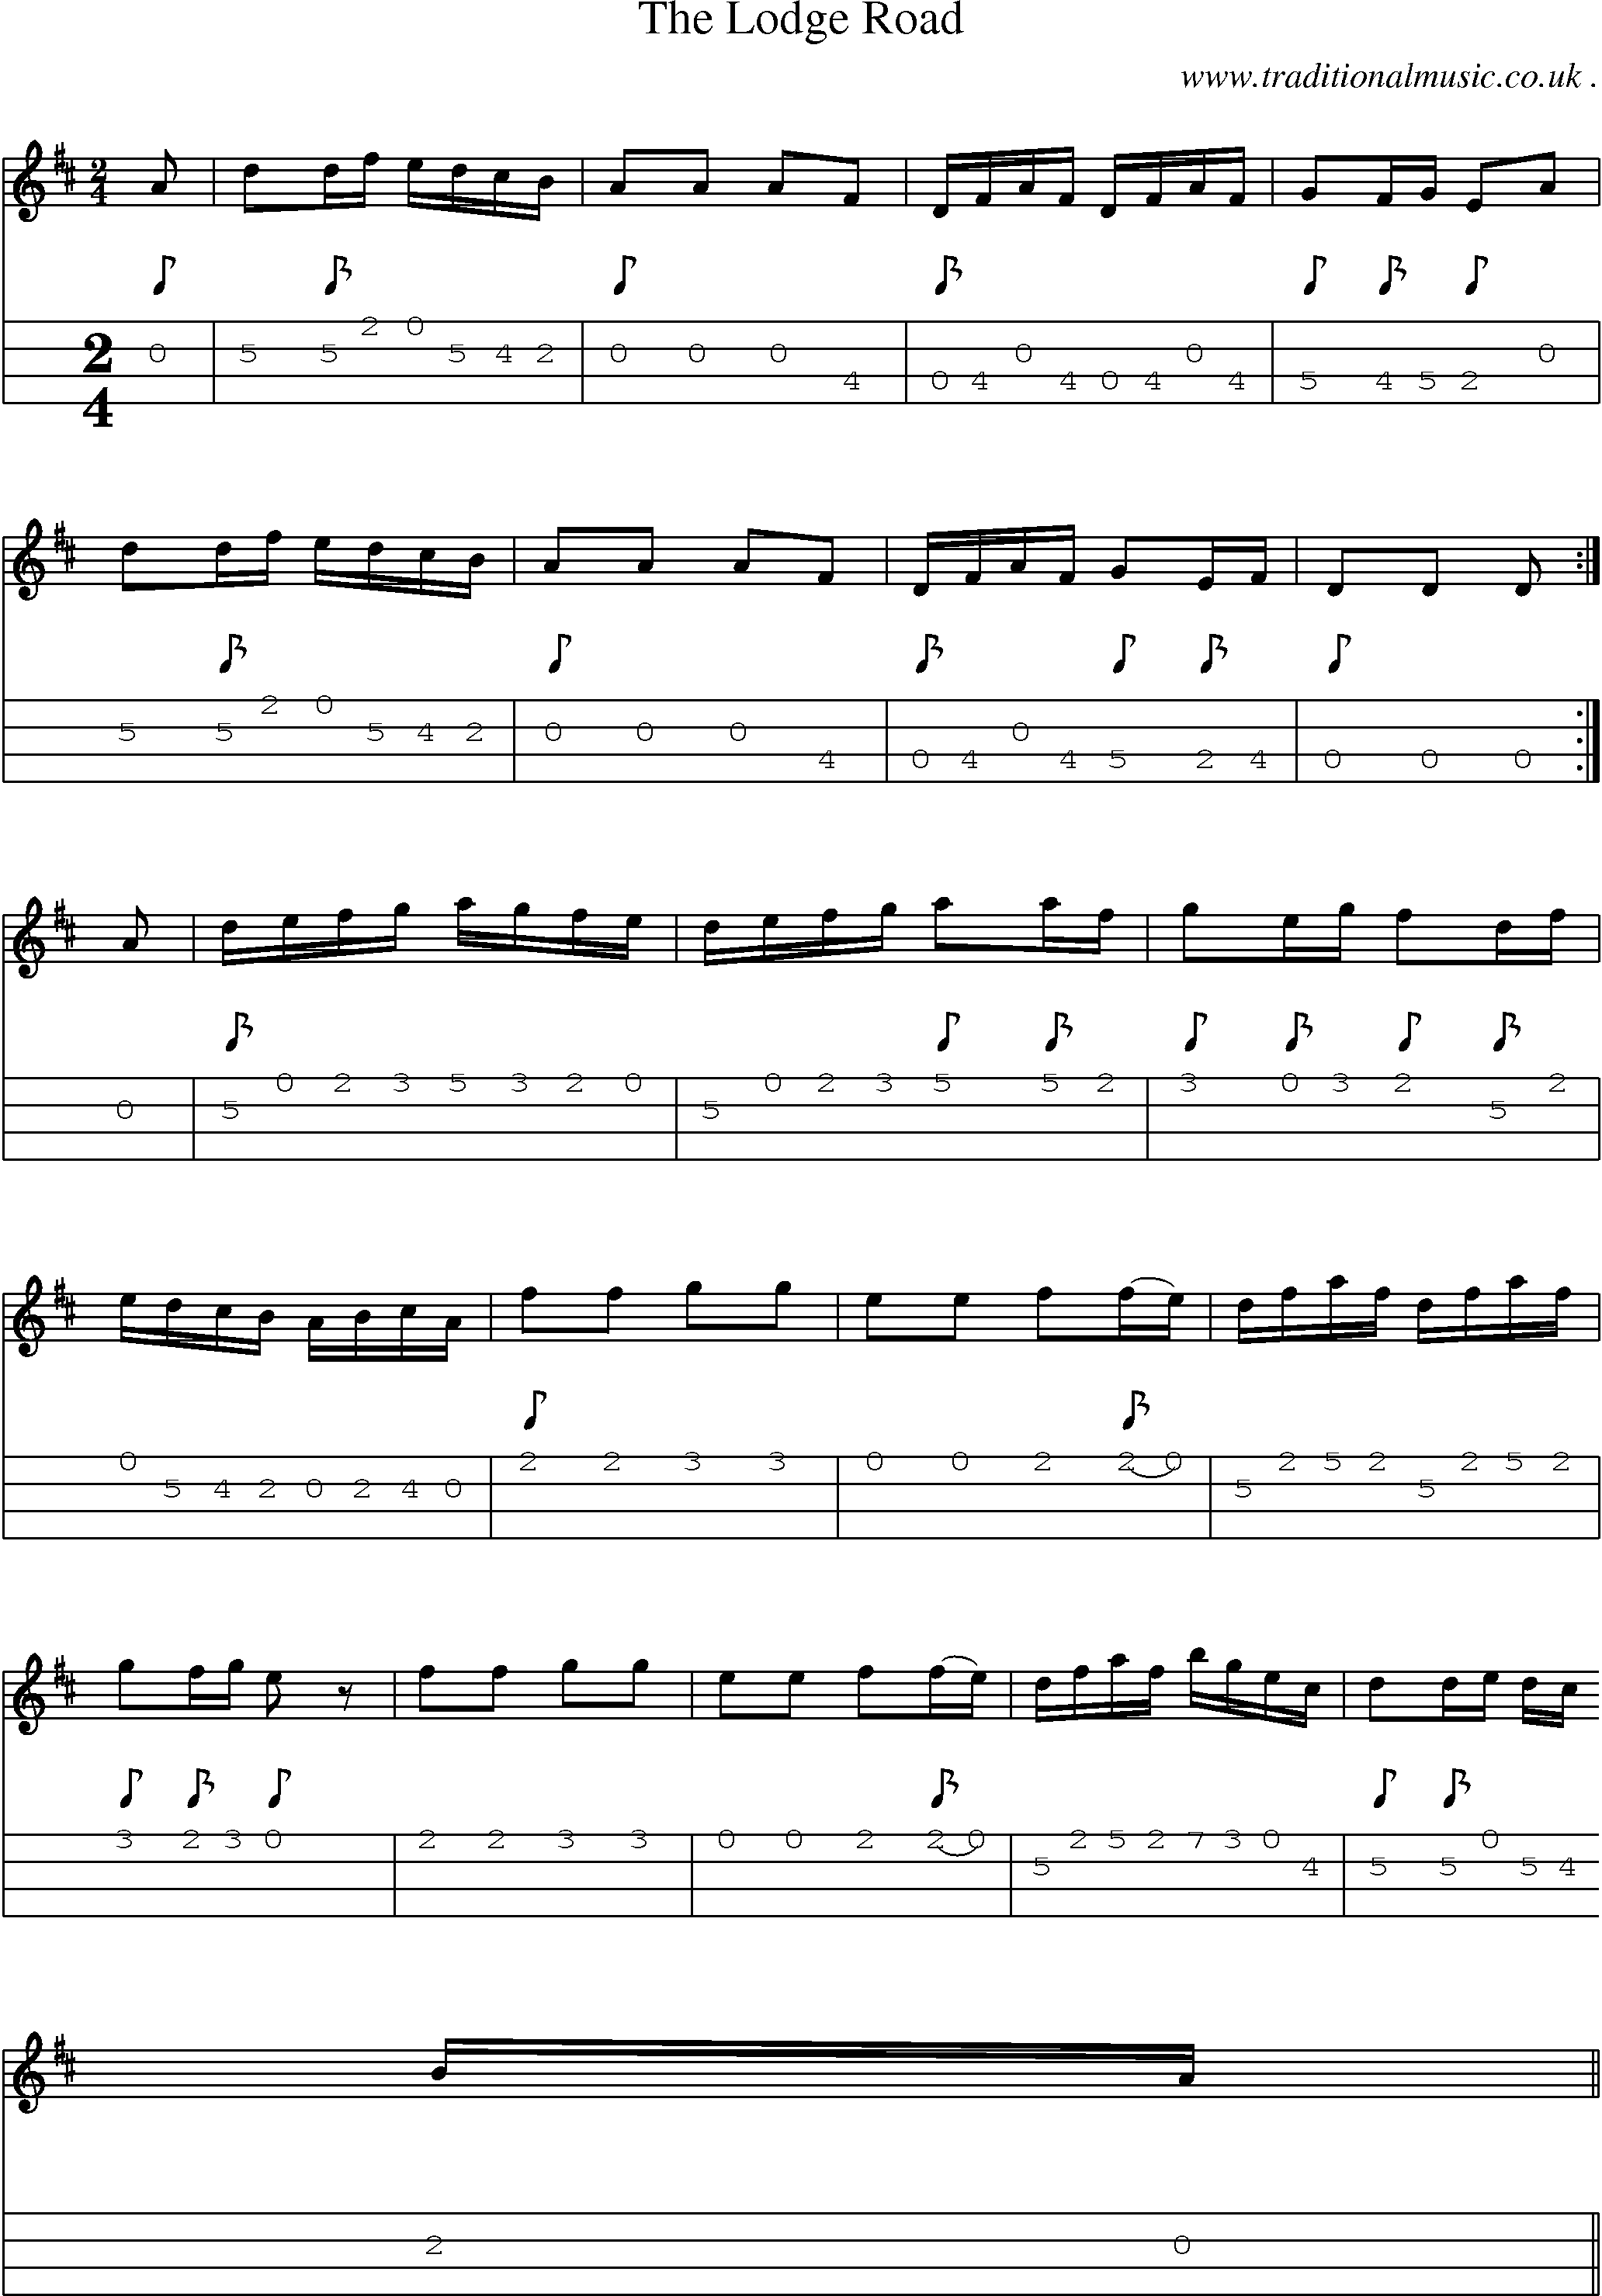 Sheet-Music and Mandolin Tabs for The Lodge Road